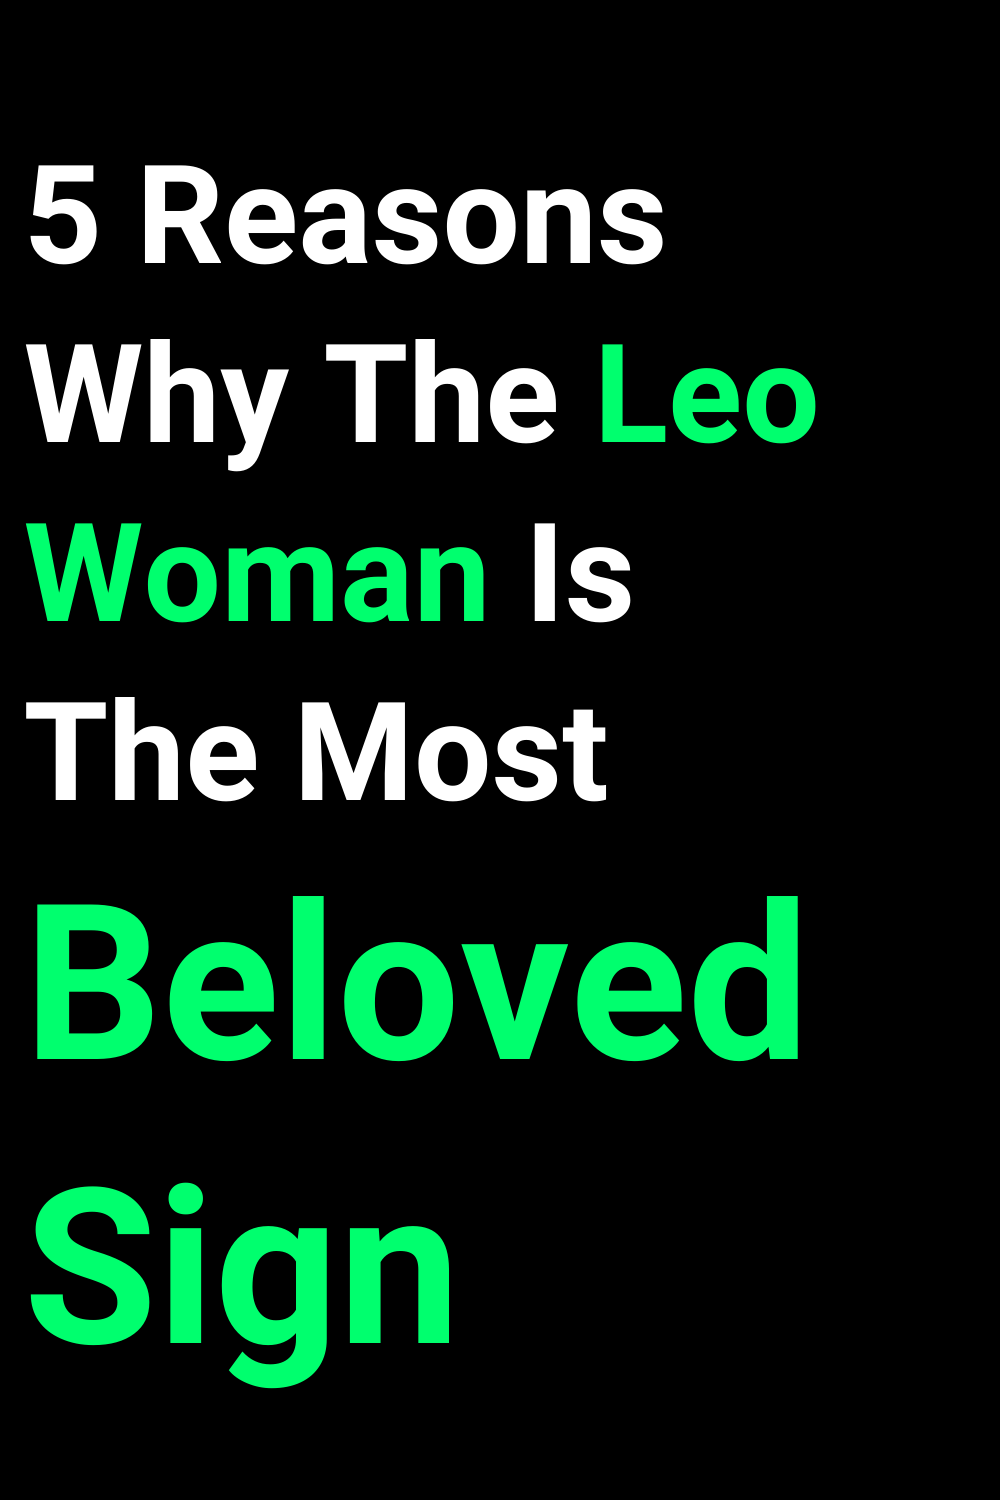 5 Reasons Why The Leo Woman Is The Most Beloved Sign